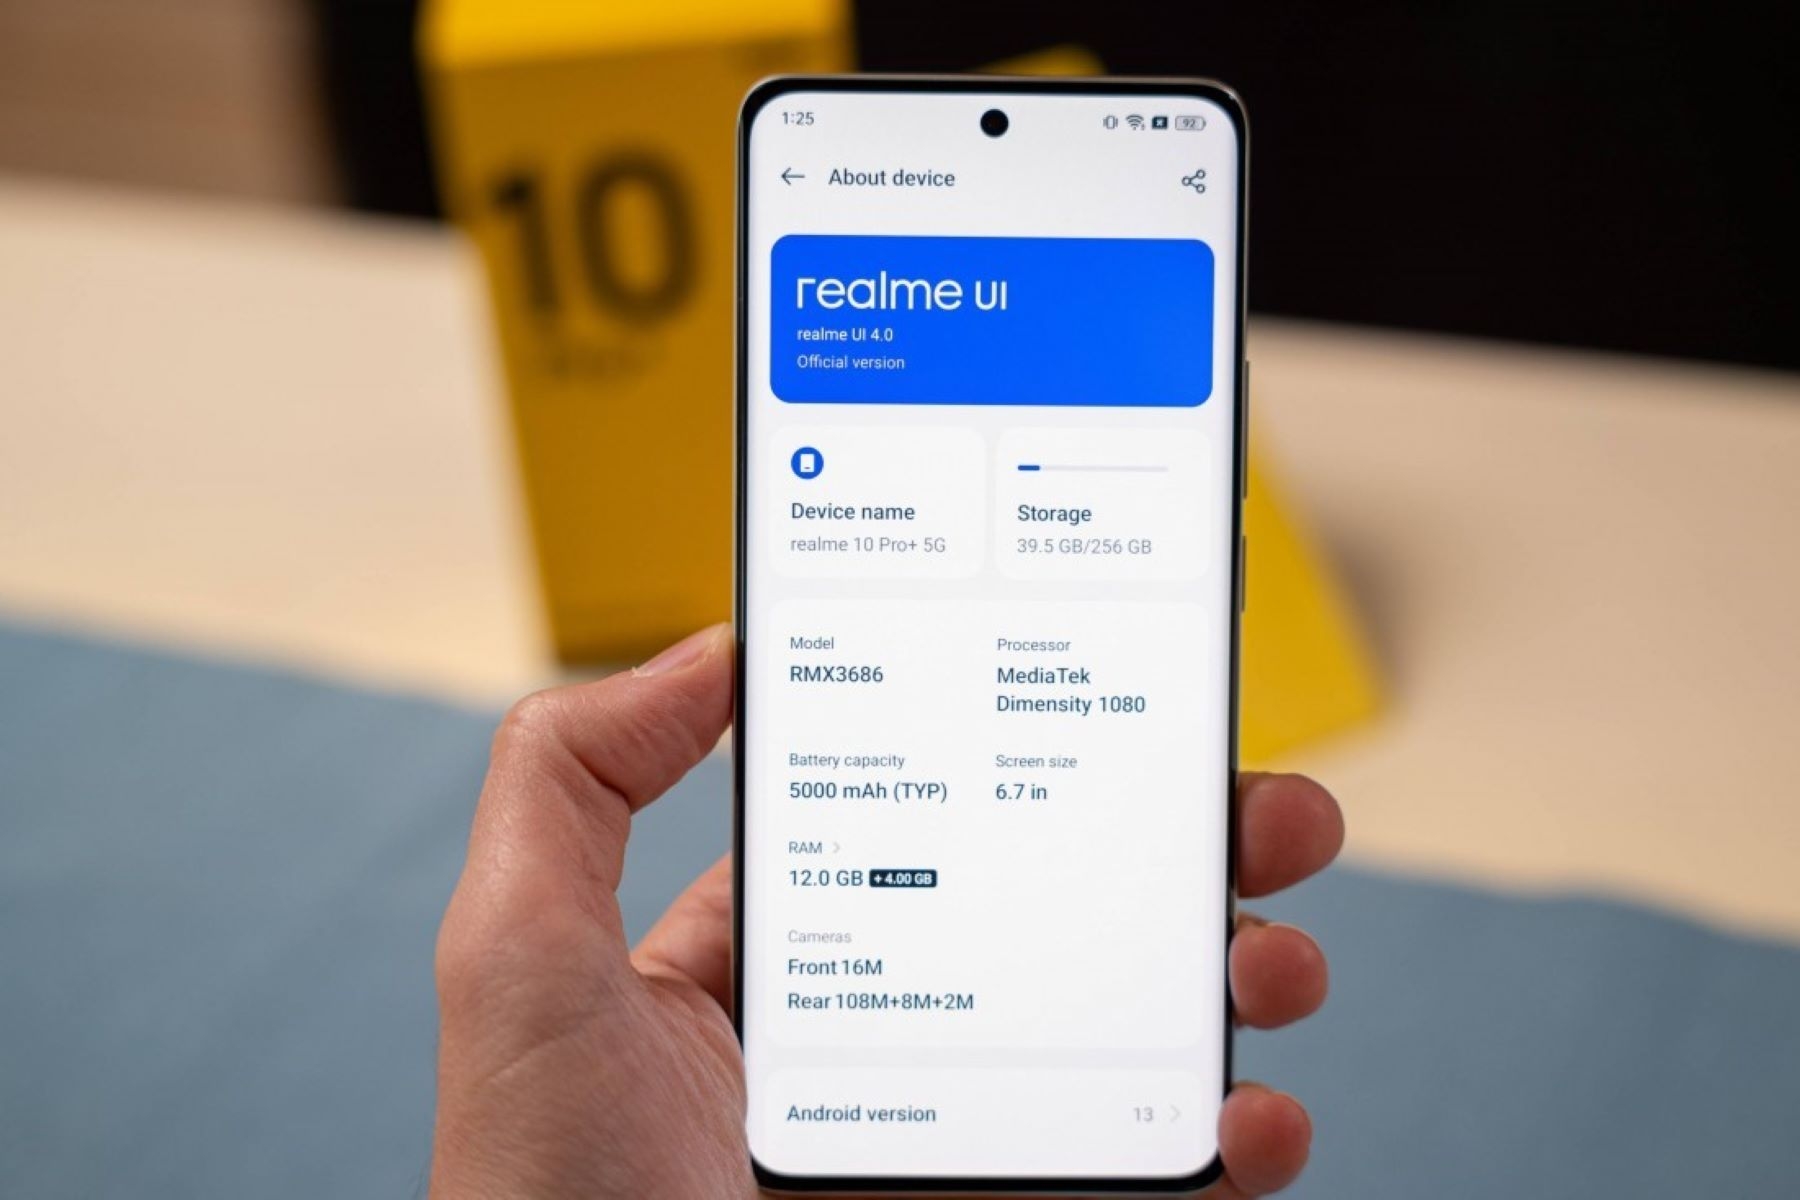 Removing Realme UI Update – Step-by-Step Guide